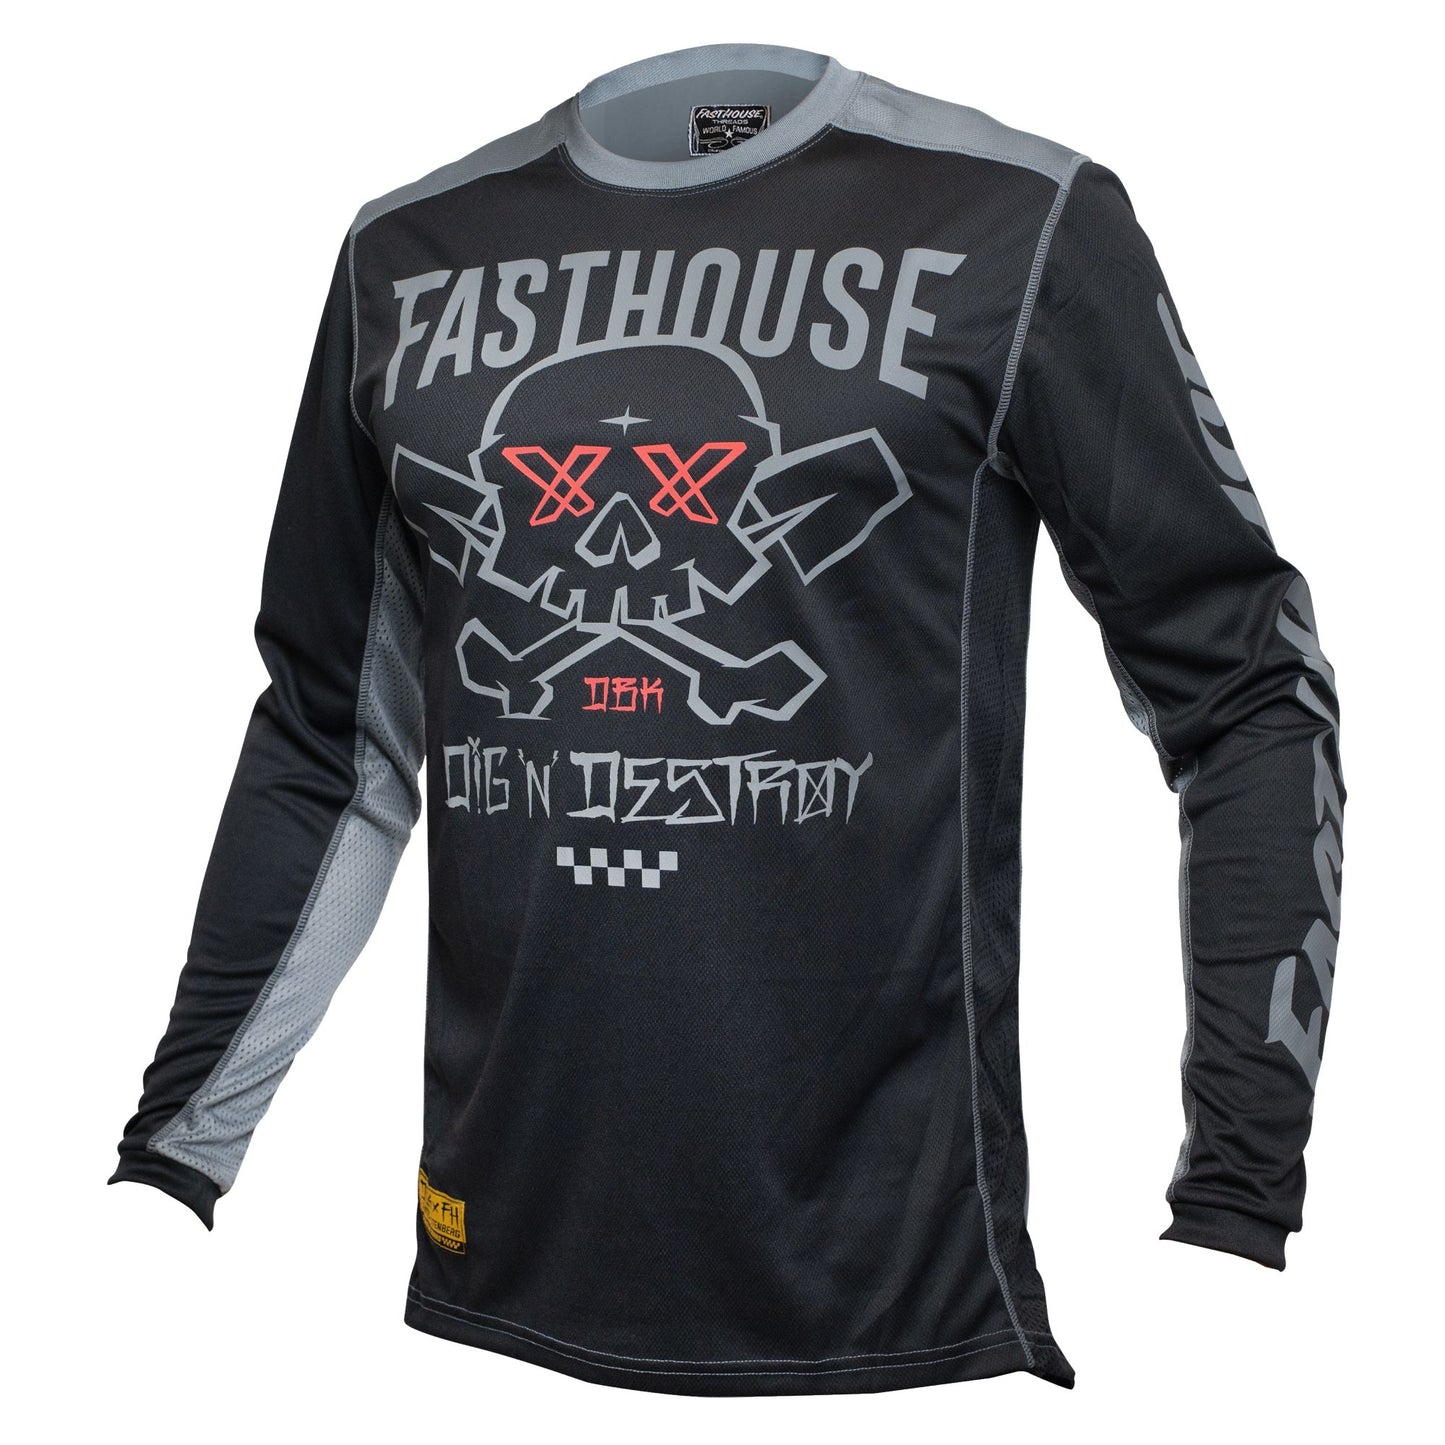 Fasthouse Grindhouse Twitch Jersey Red/Black Bike Jerseys